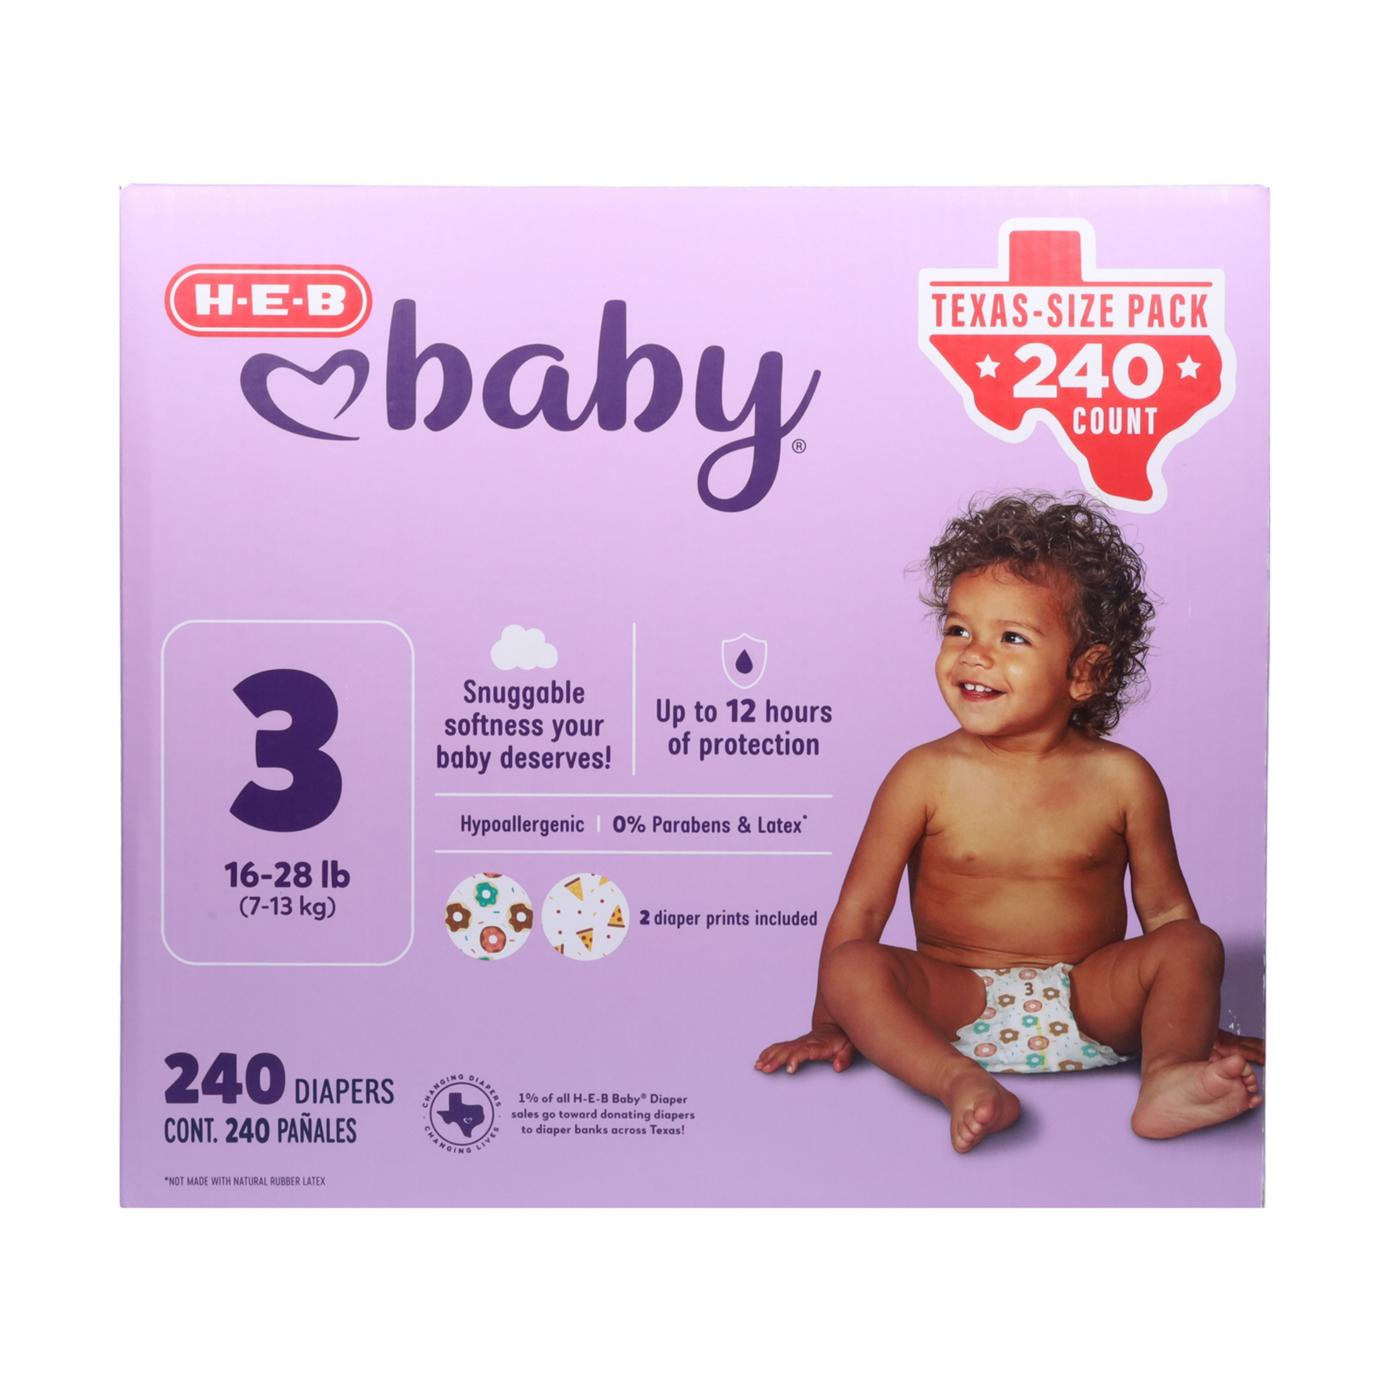 H-E-B Baby Diapers - Size 3 - Texas-Size Pack; image 1 of 6